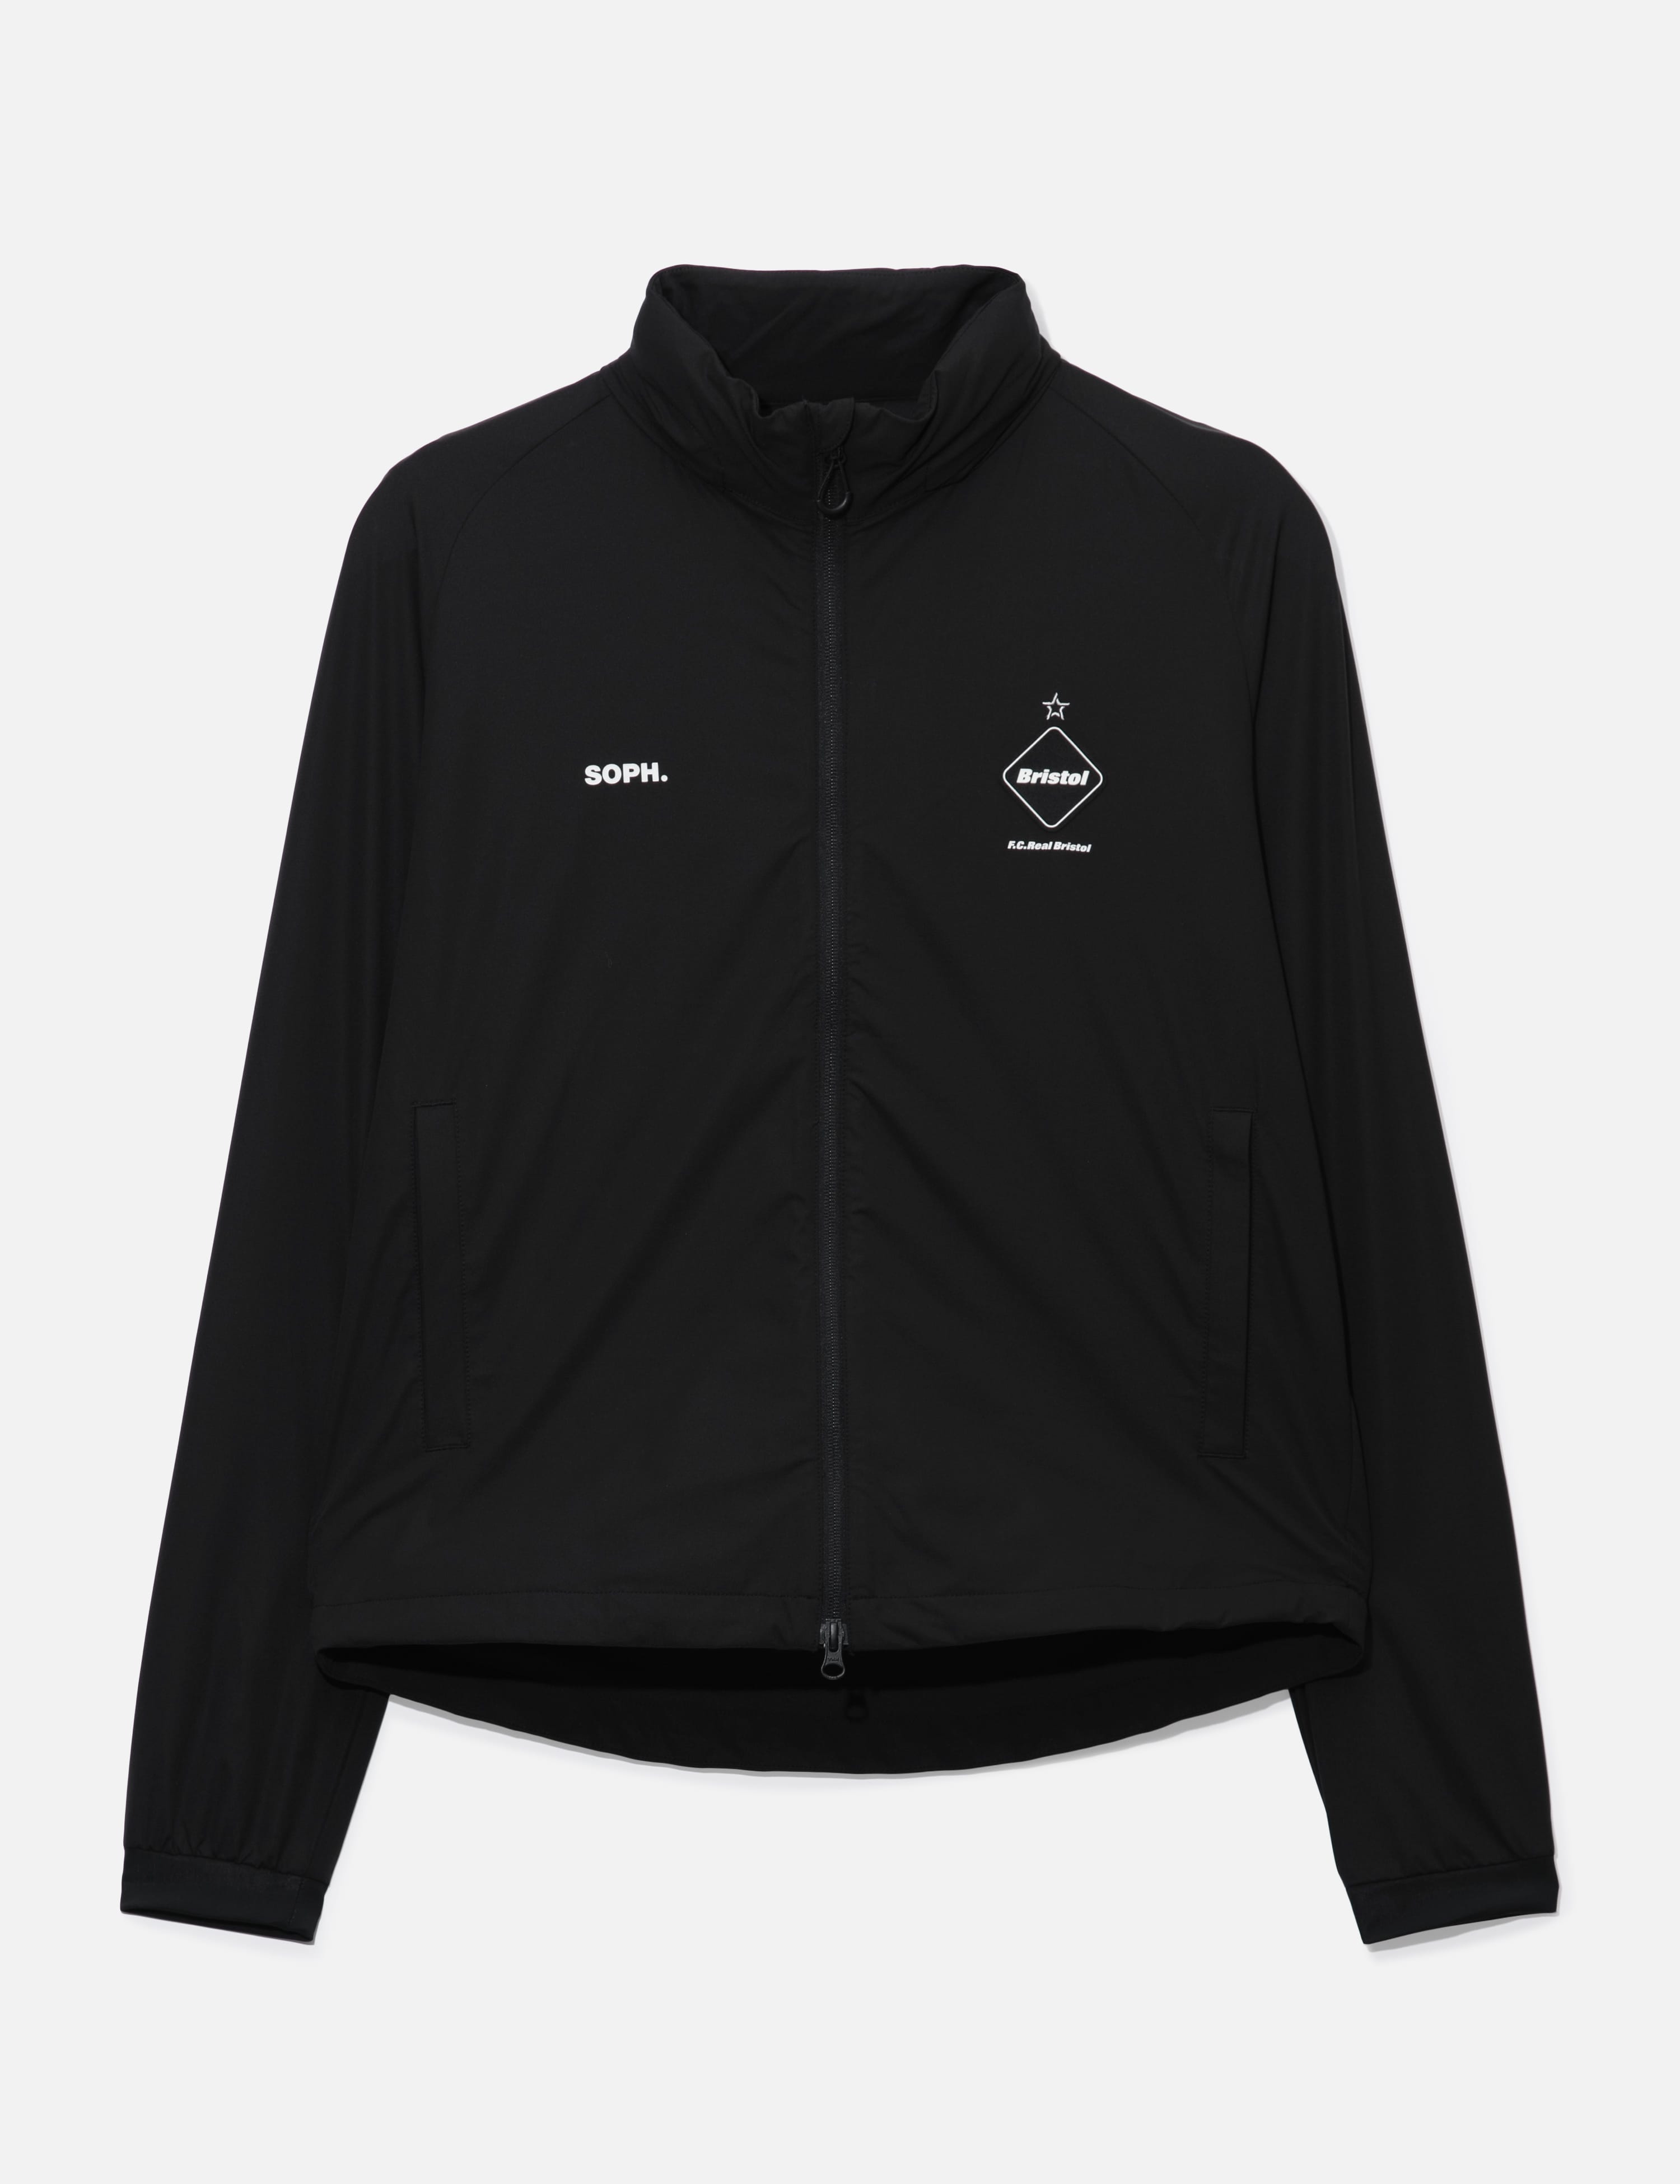 F.C. Real Bristol - FCRB STAR JACKET | HBX - Globally Curated